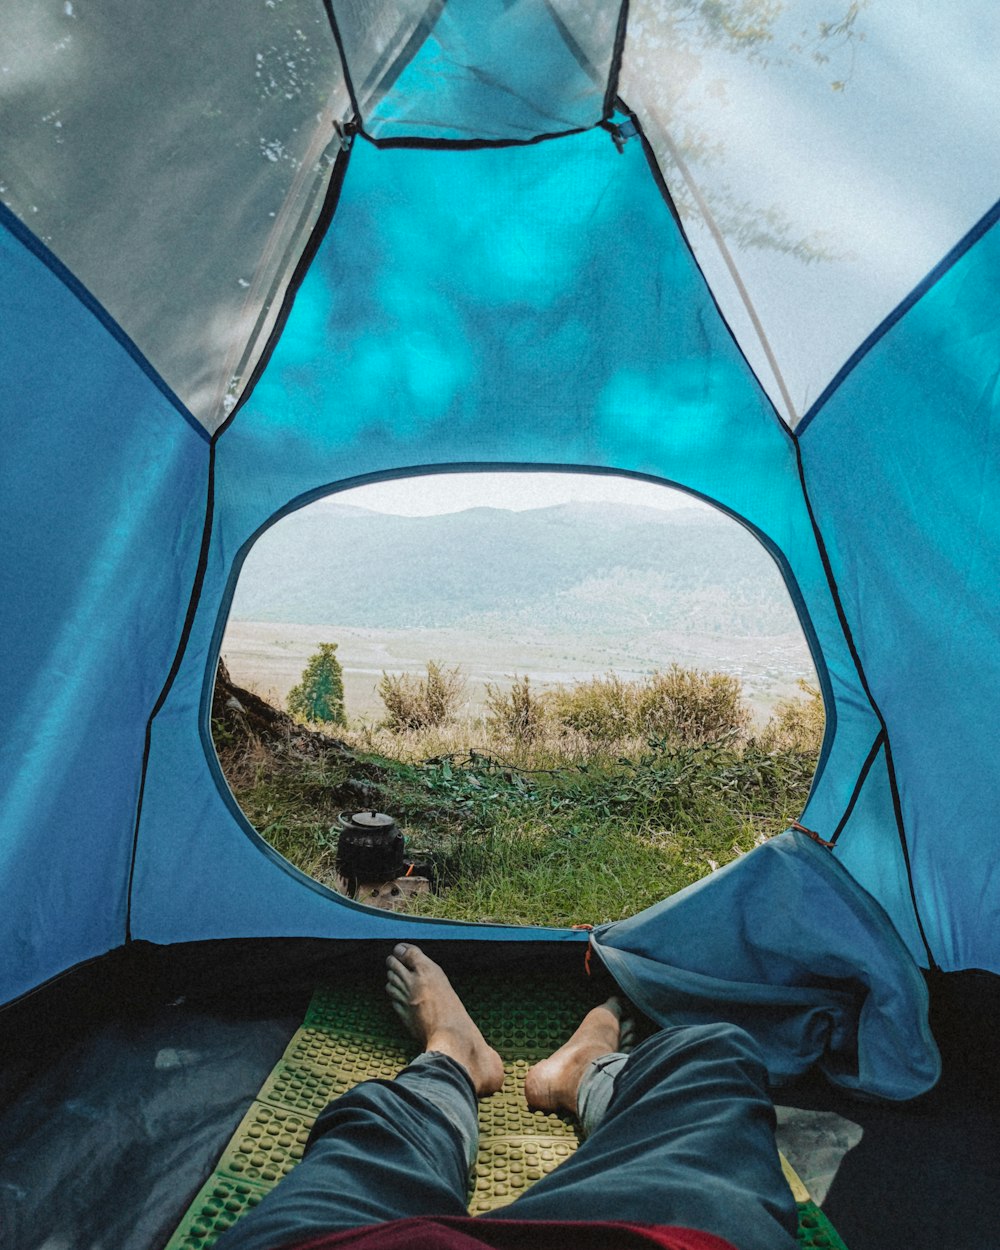 person in blue pants sitting inside blue tent